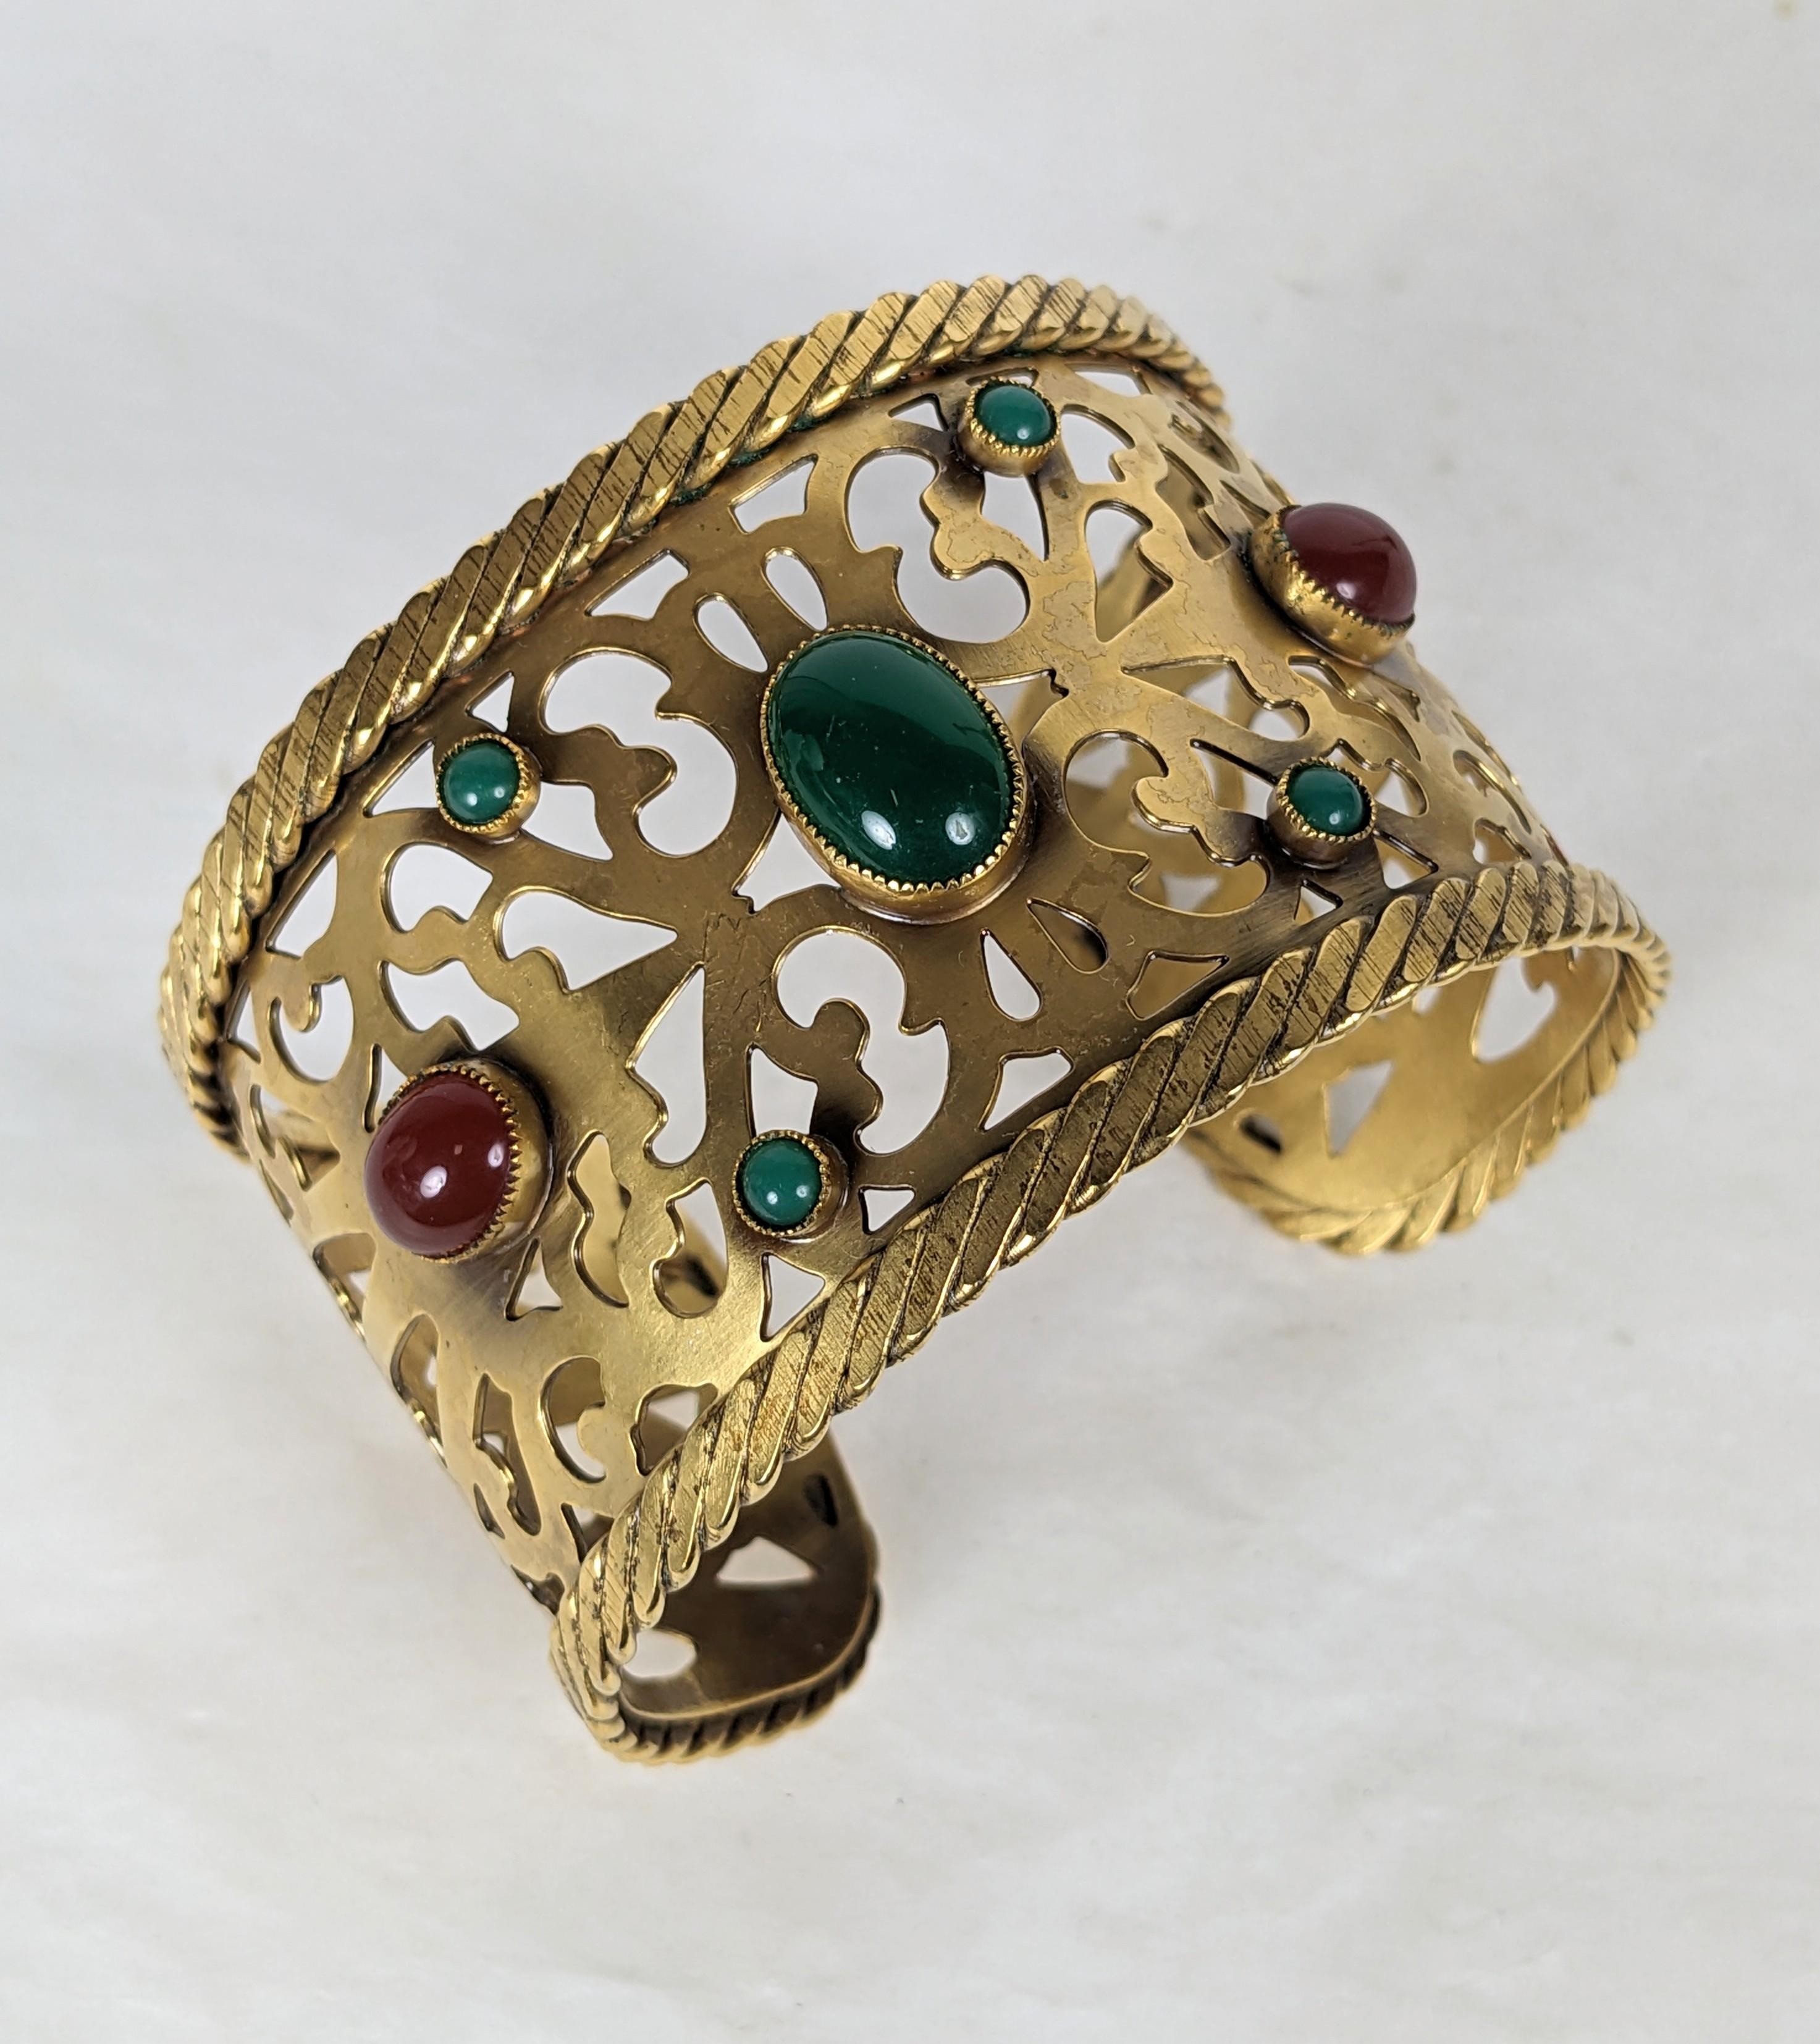 Yves Saint Laurent Byzantine Jeweled Cuff For Sale 2